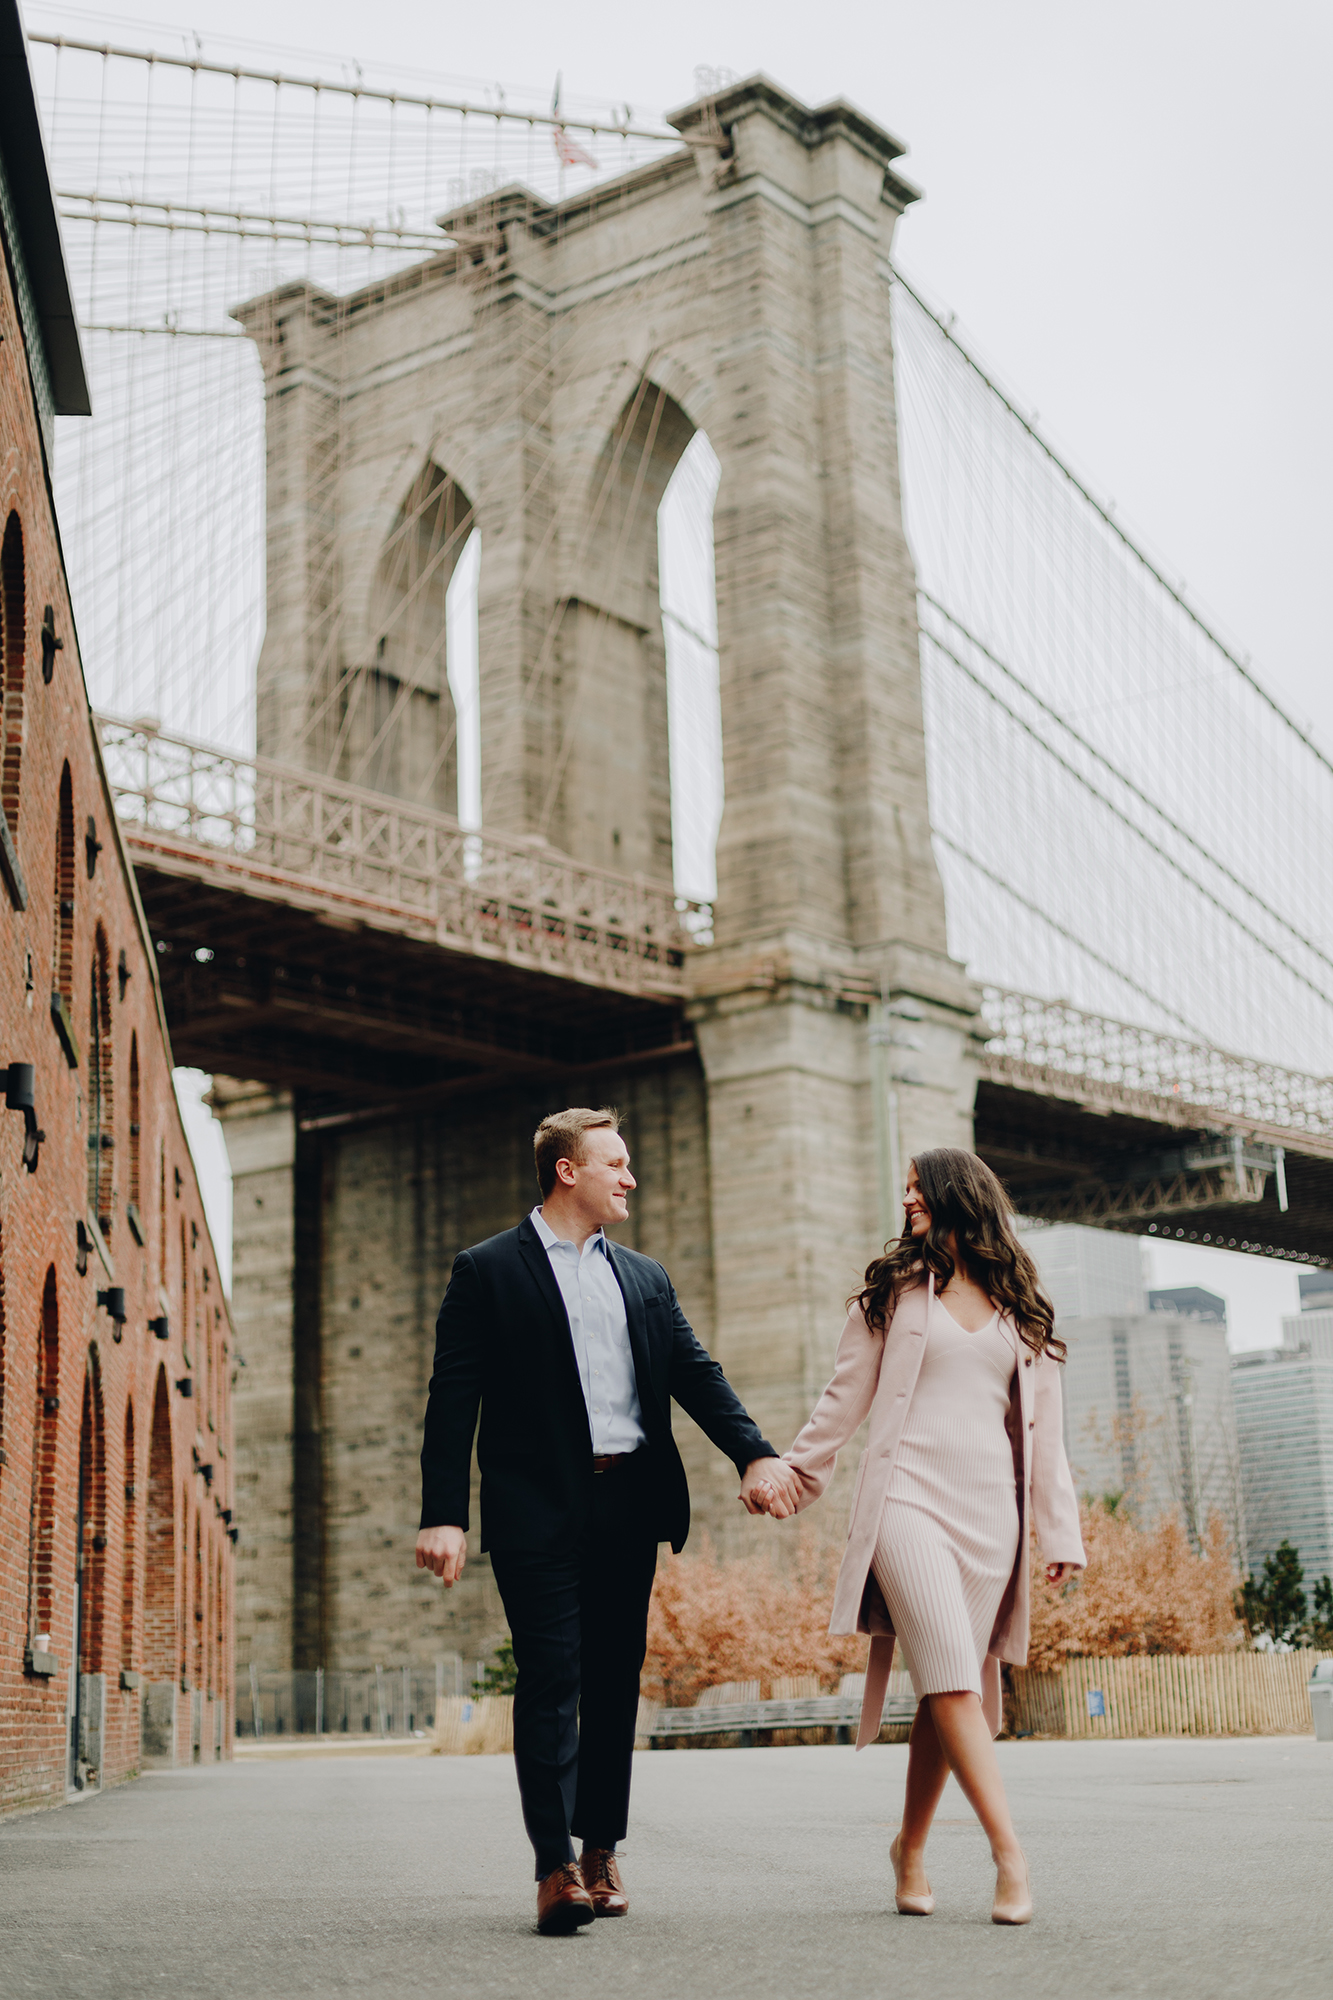 Everything You Need to Know About Engagement Photos - BWP Blog